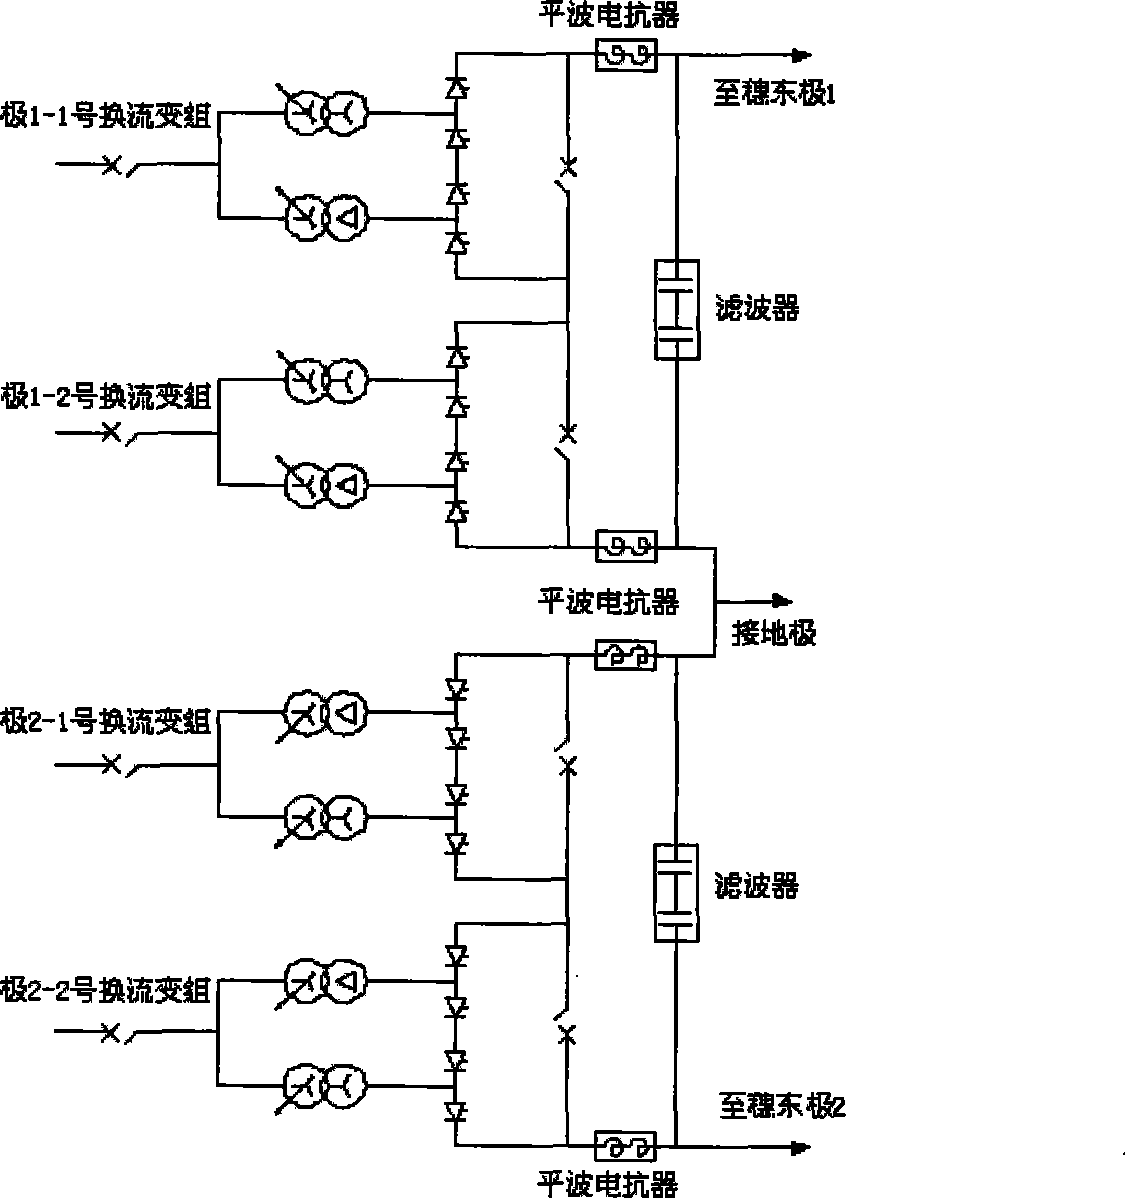 Method for evaluating reliability of +/- 800kV current exchanging station main wire connection